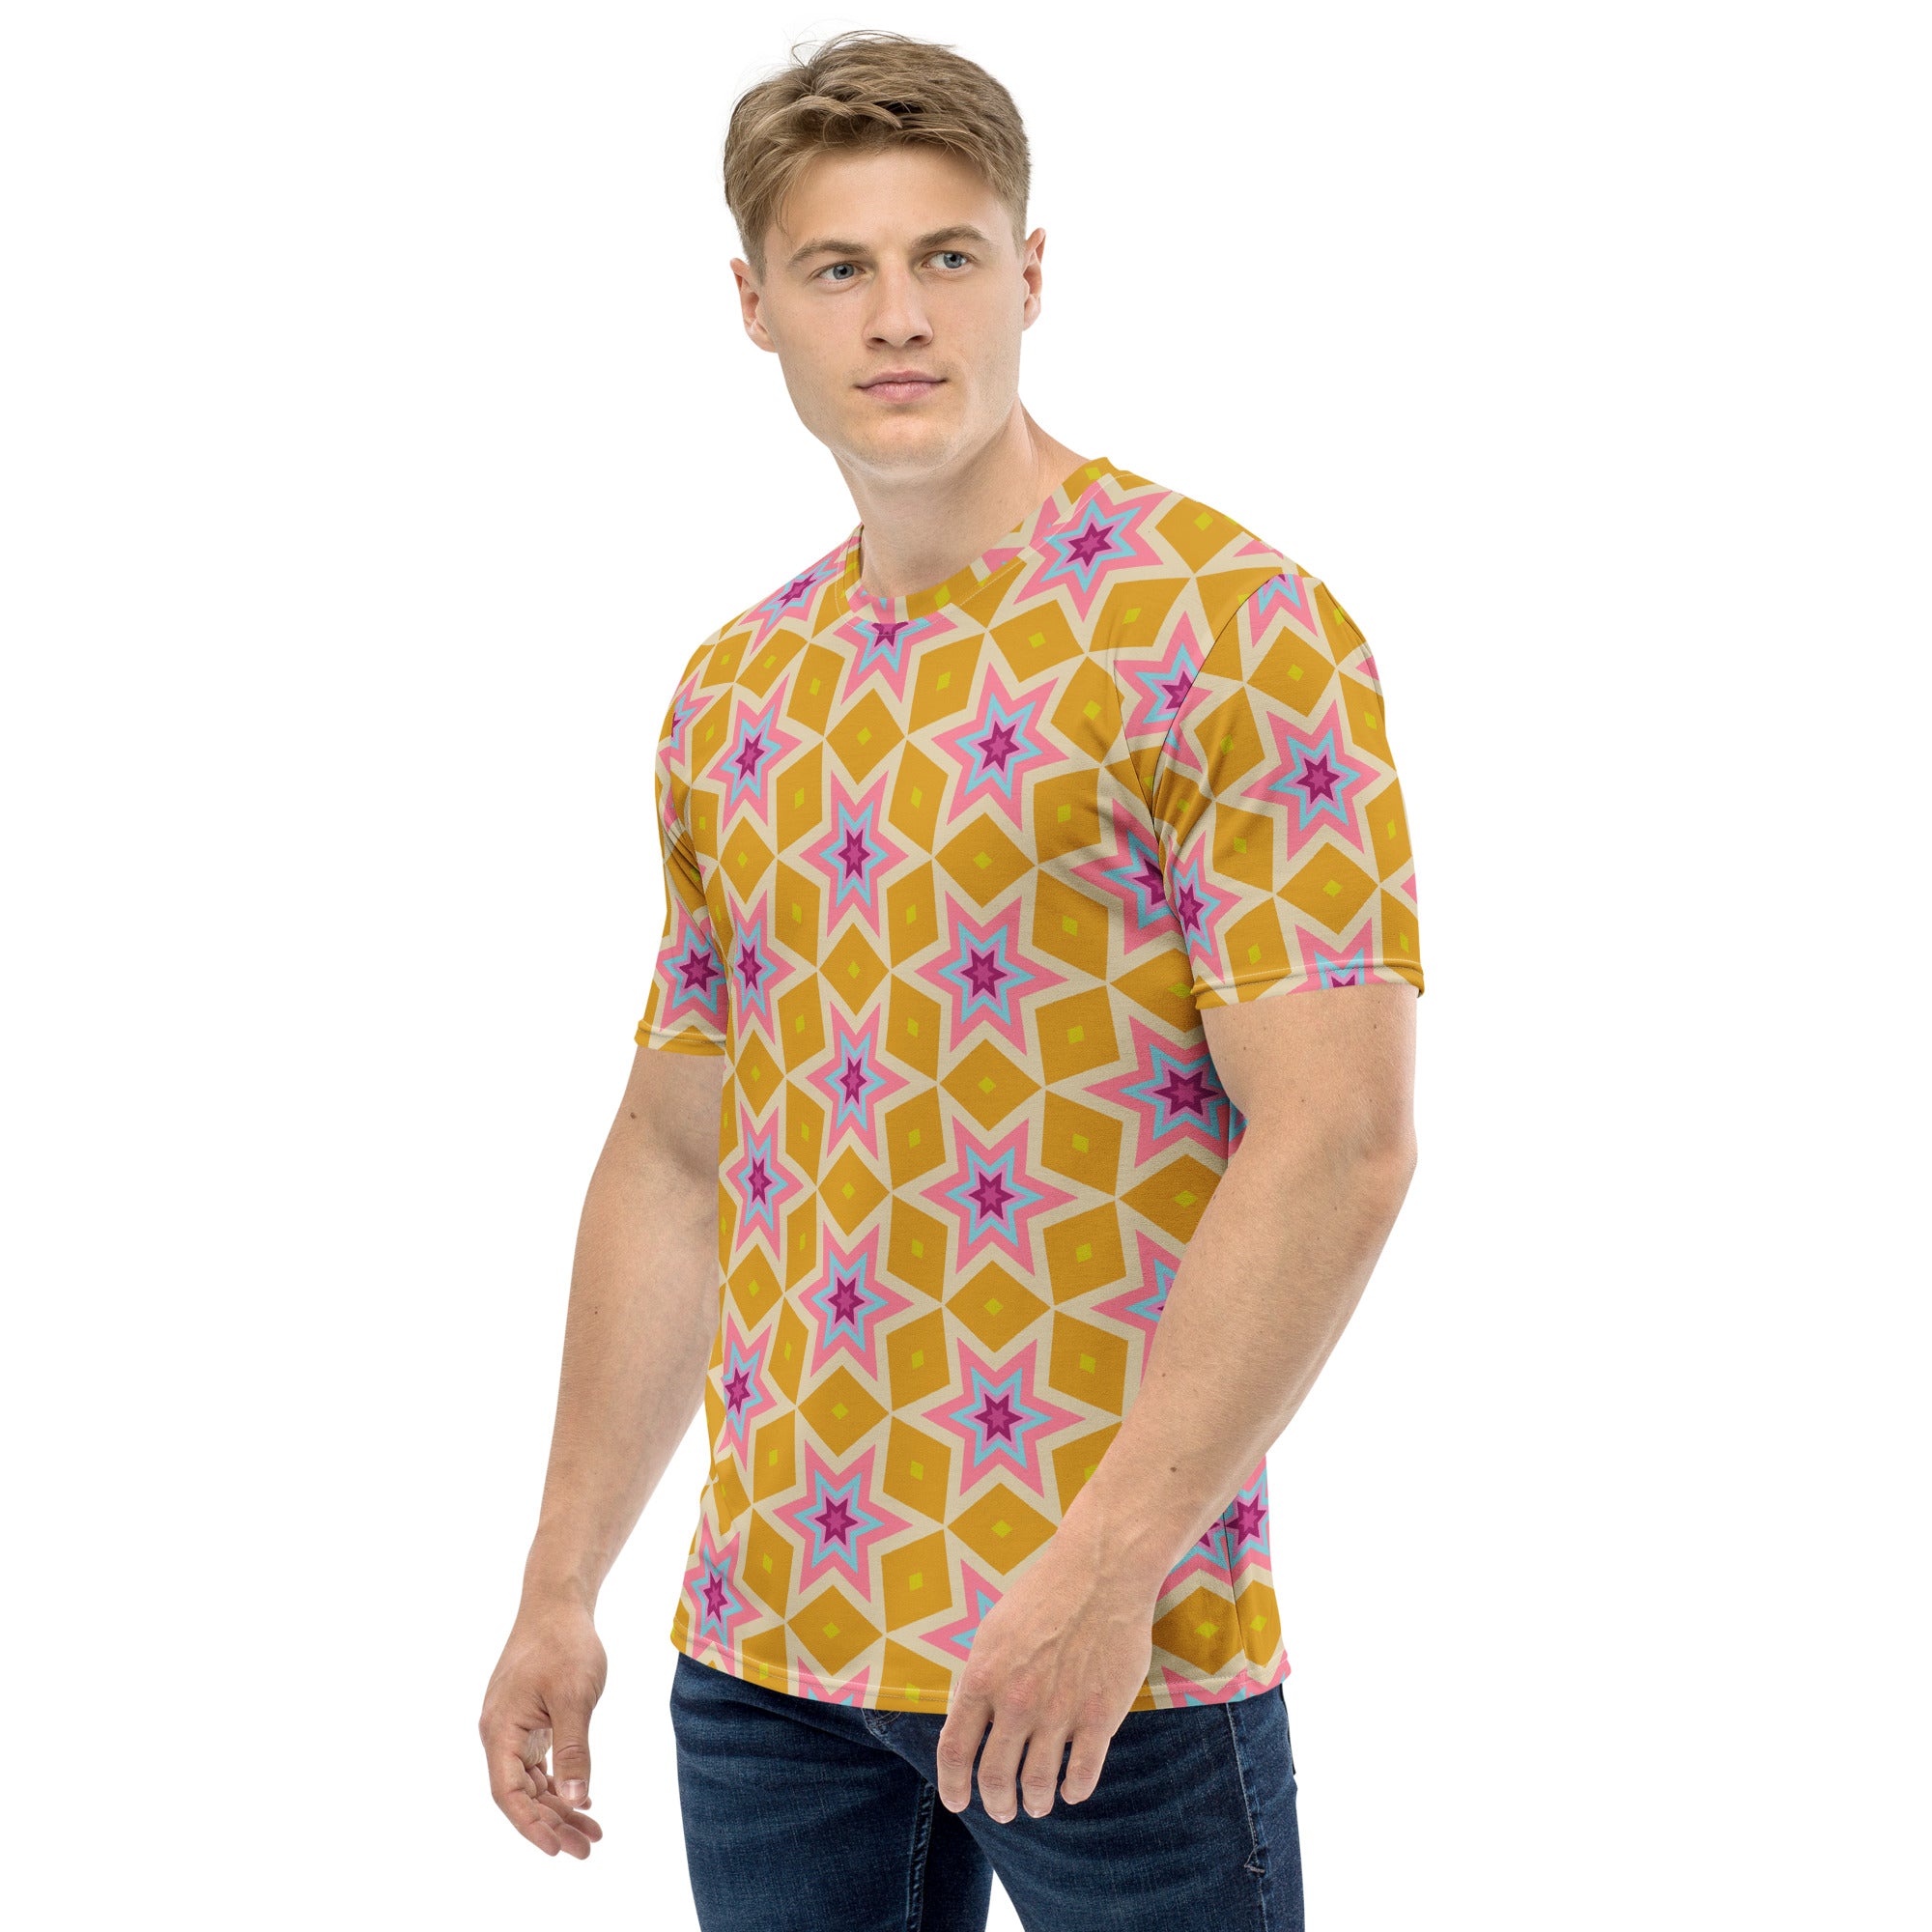 Stylish Floral Fusion Crewneck Tee for men in outdoor light.